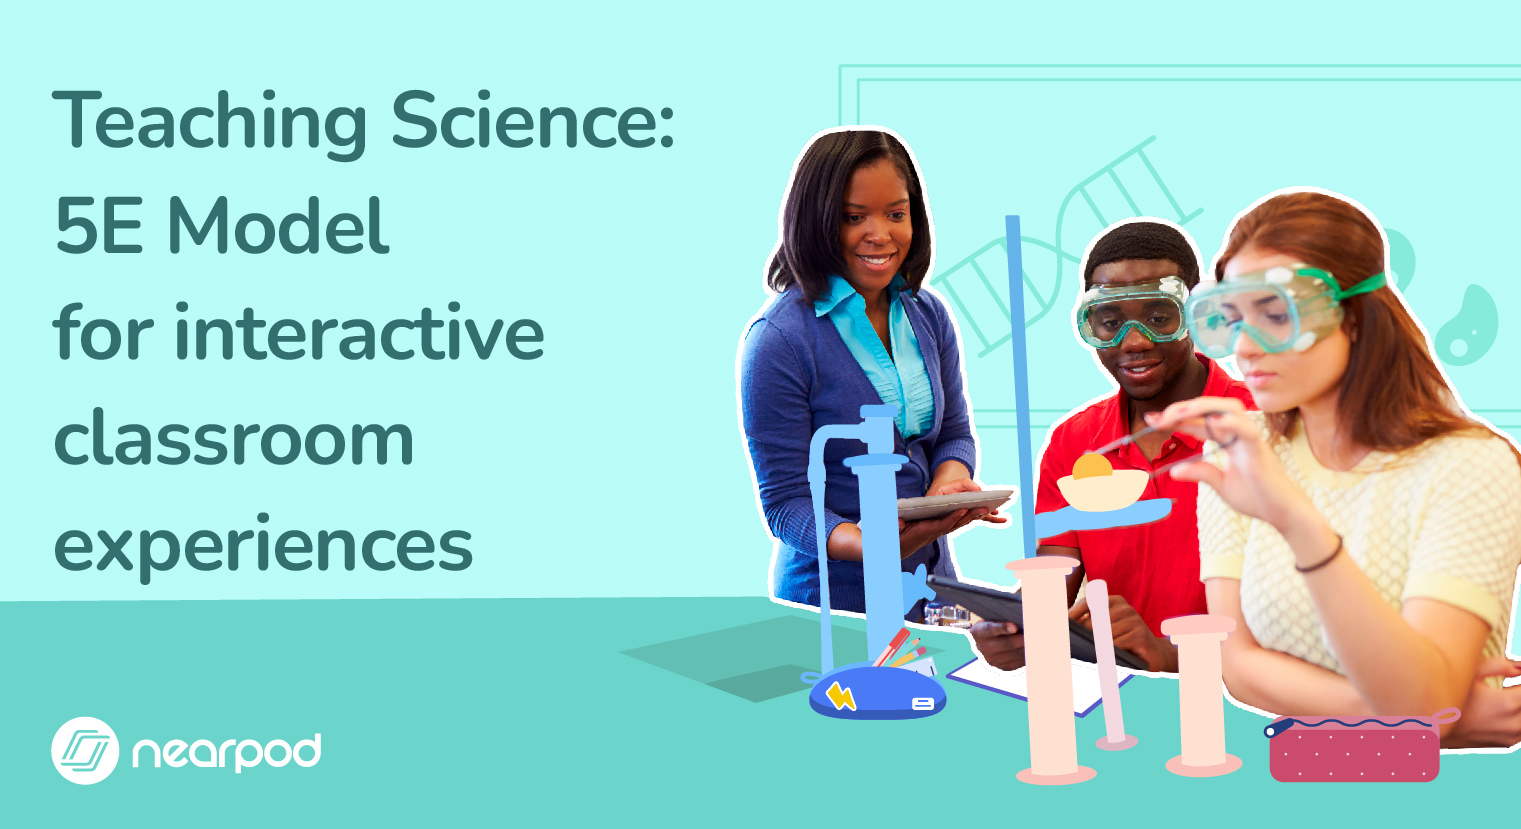 Teaching Science: 5E Model for interactive classroom experiences